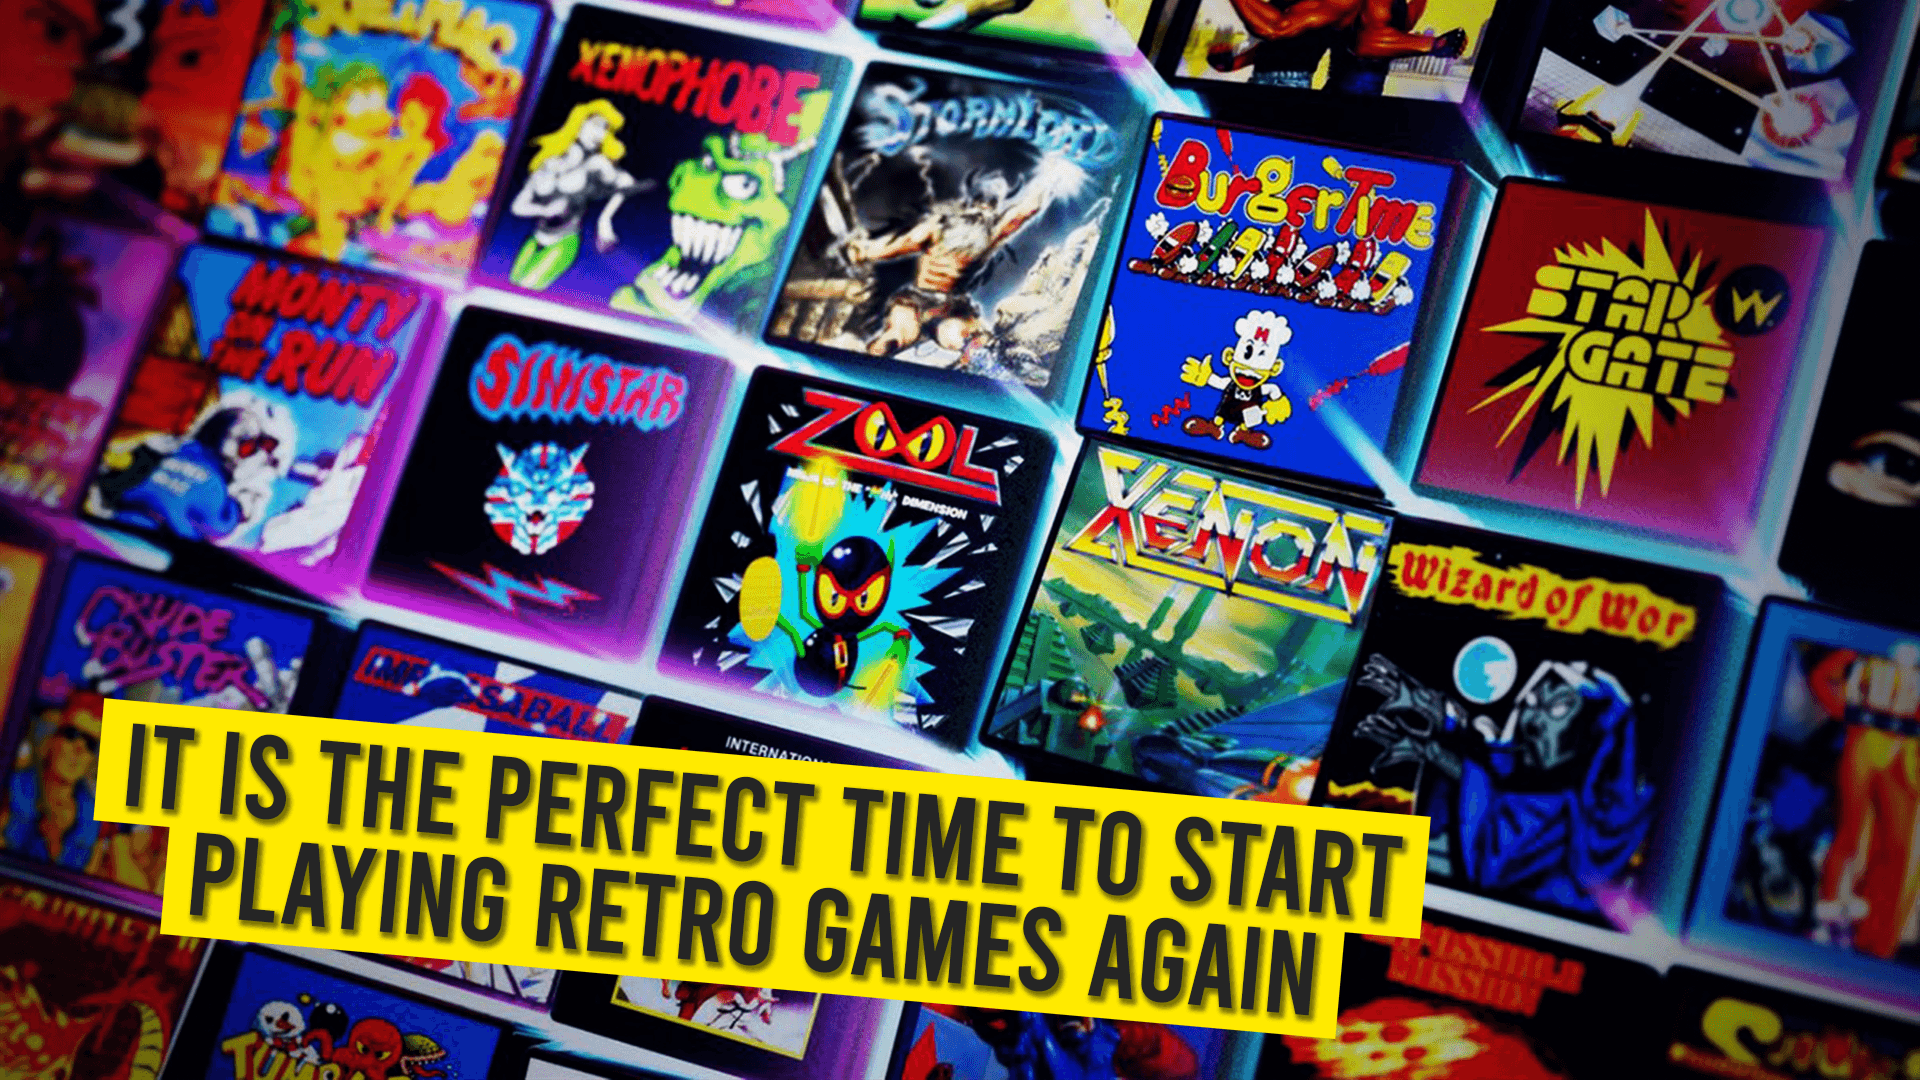 It is The Perfect Time To Star Playing Retro Games Again